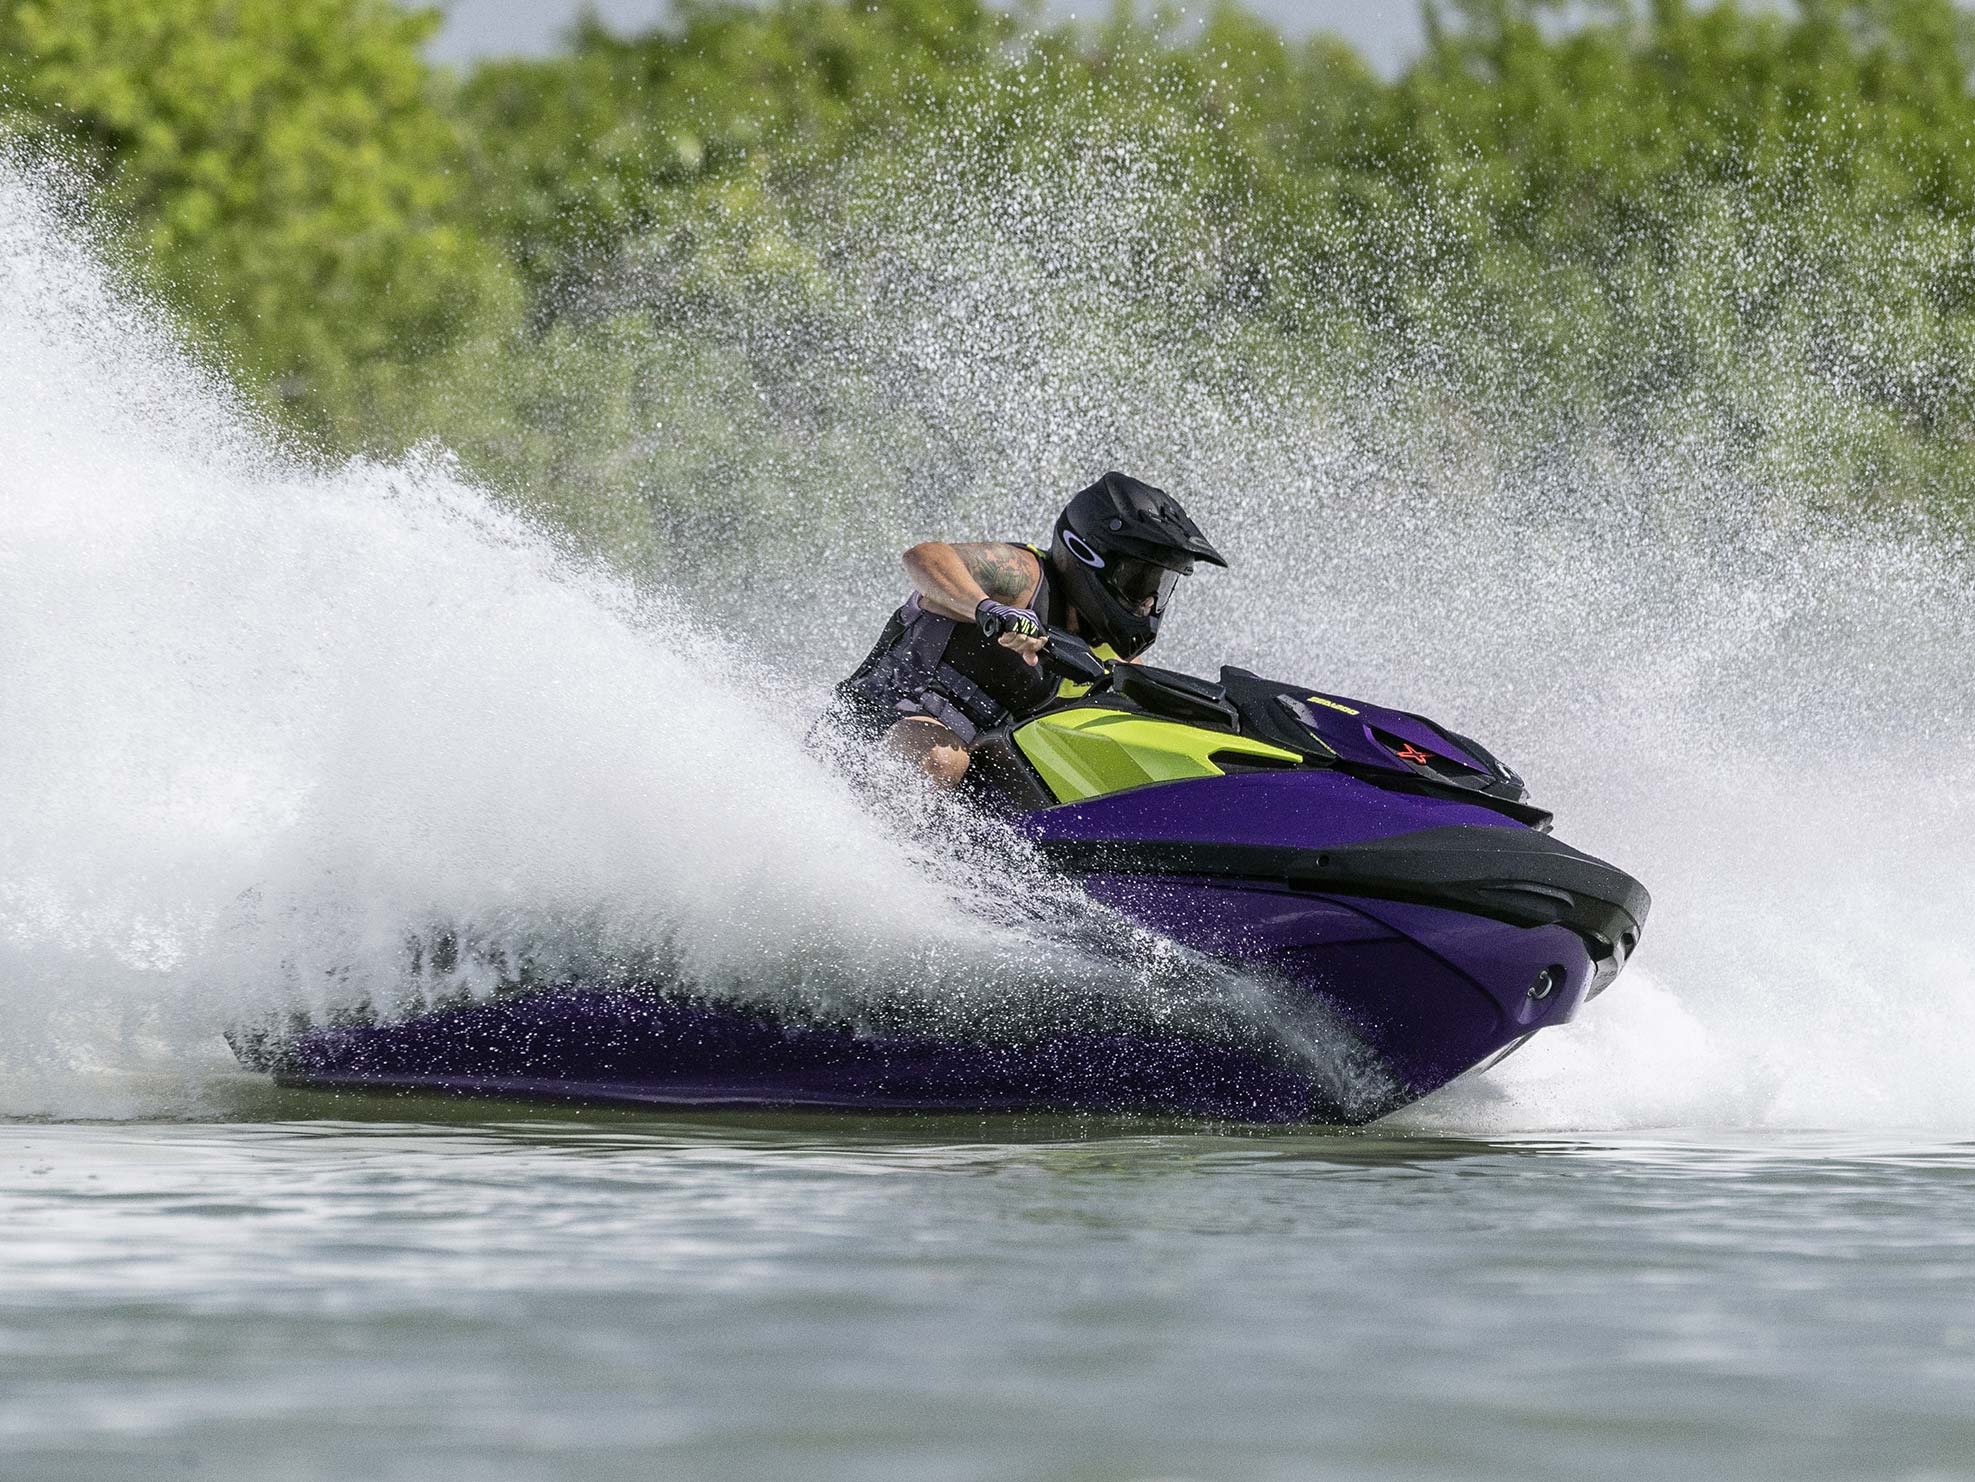 Man carving with a Sea-Doo on the water